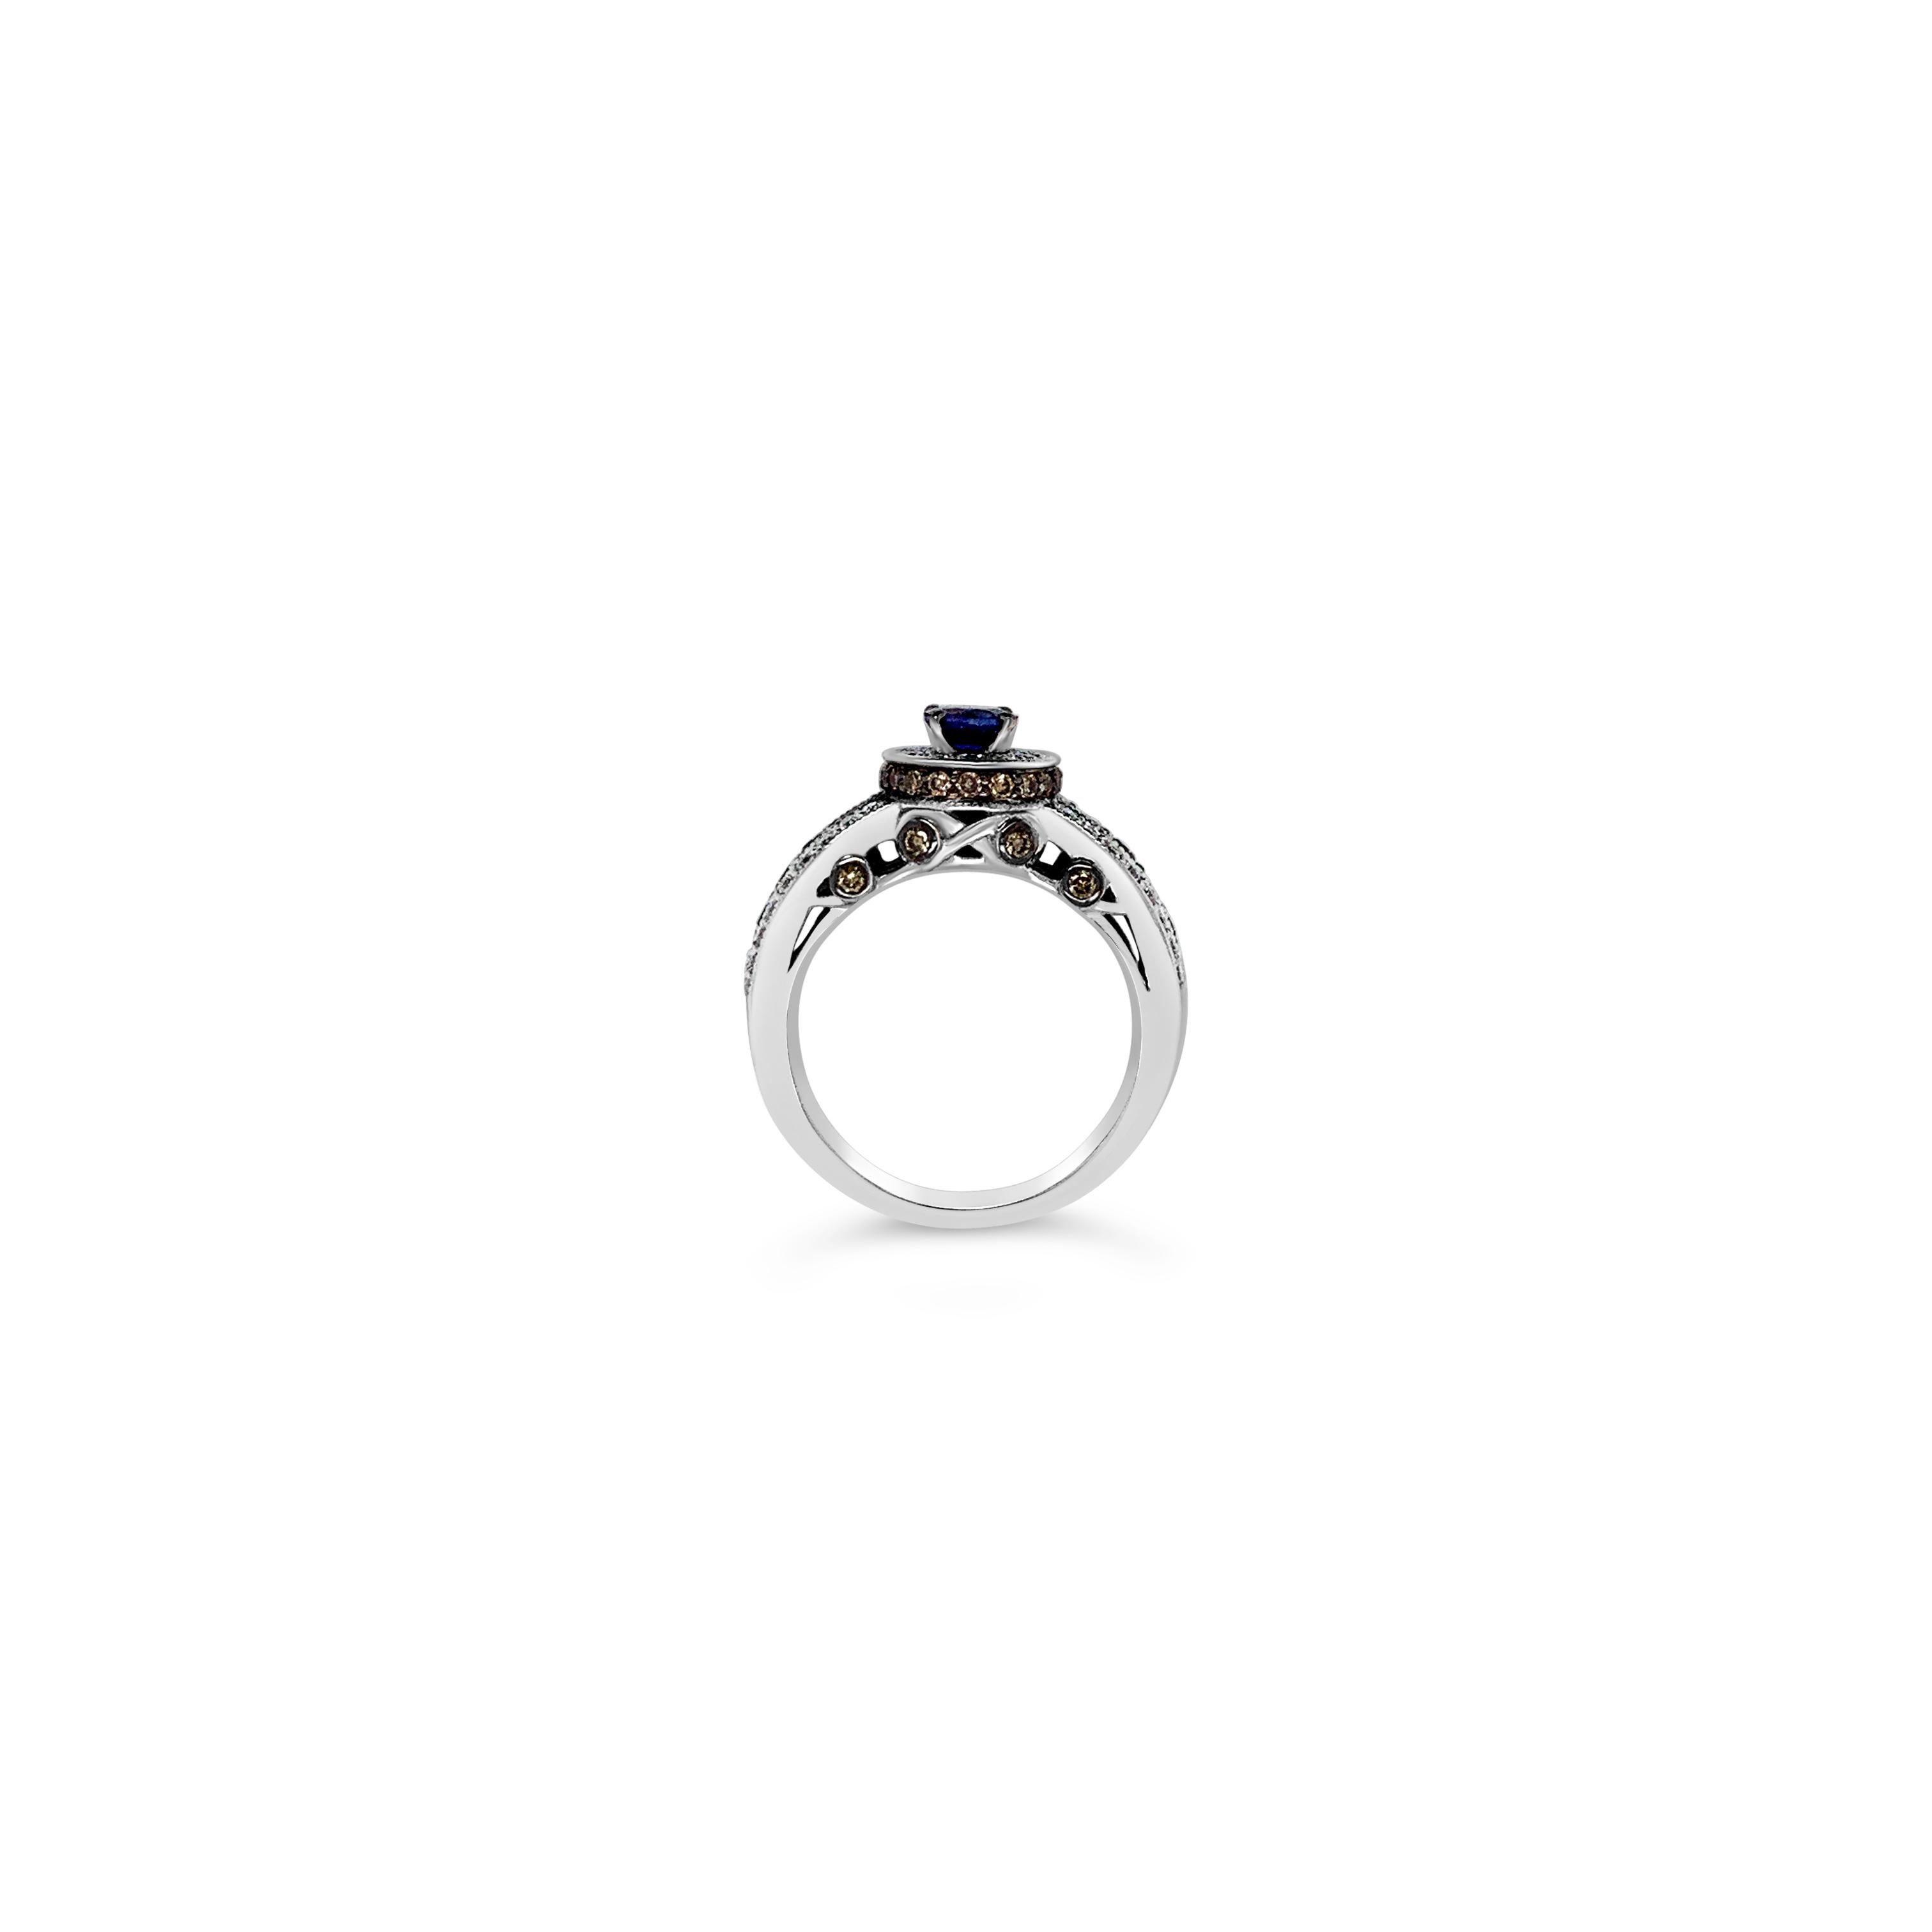 New Le Vian Bridal® Ring featuring 0.50 cts. Blueberry Sapphire™, 0.40 cts. Vanilla Diamonds® , 0.54 cts. Chocolate Diamonds®  set in 14K Vanilla Gold®
Ring size 6.5
Please feel free to reach out with any questions! Item comes with a Le Vian®